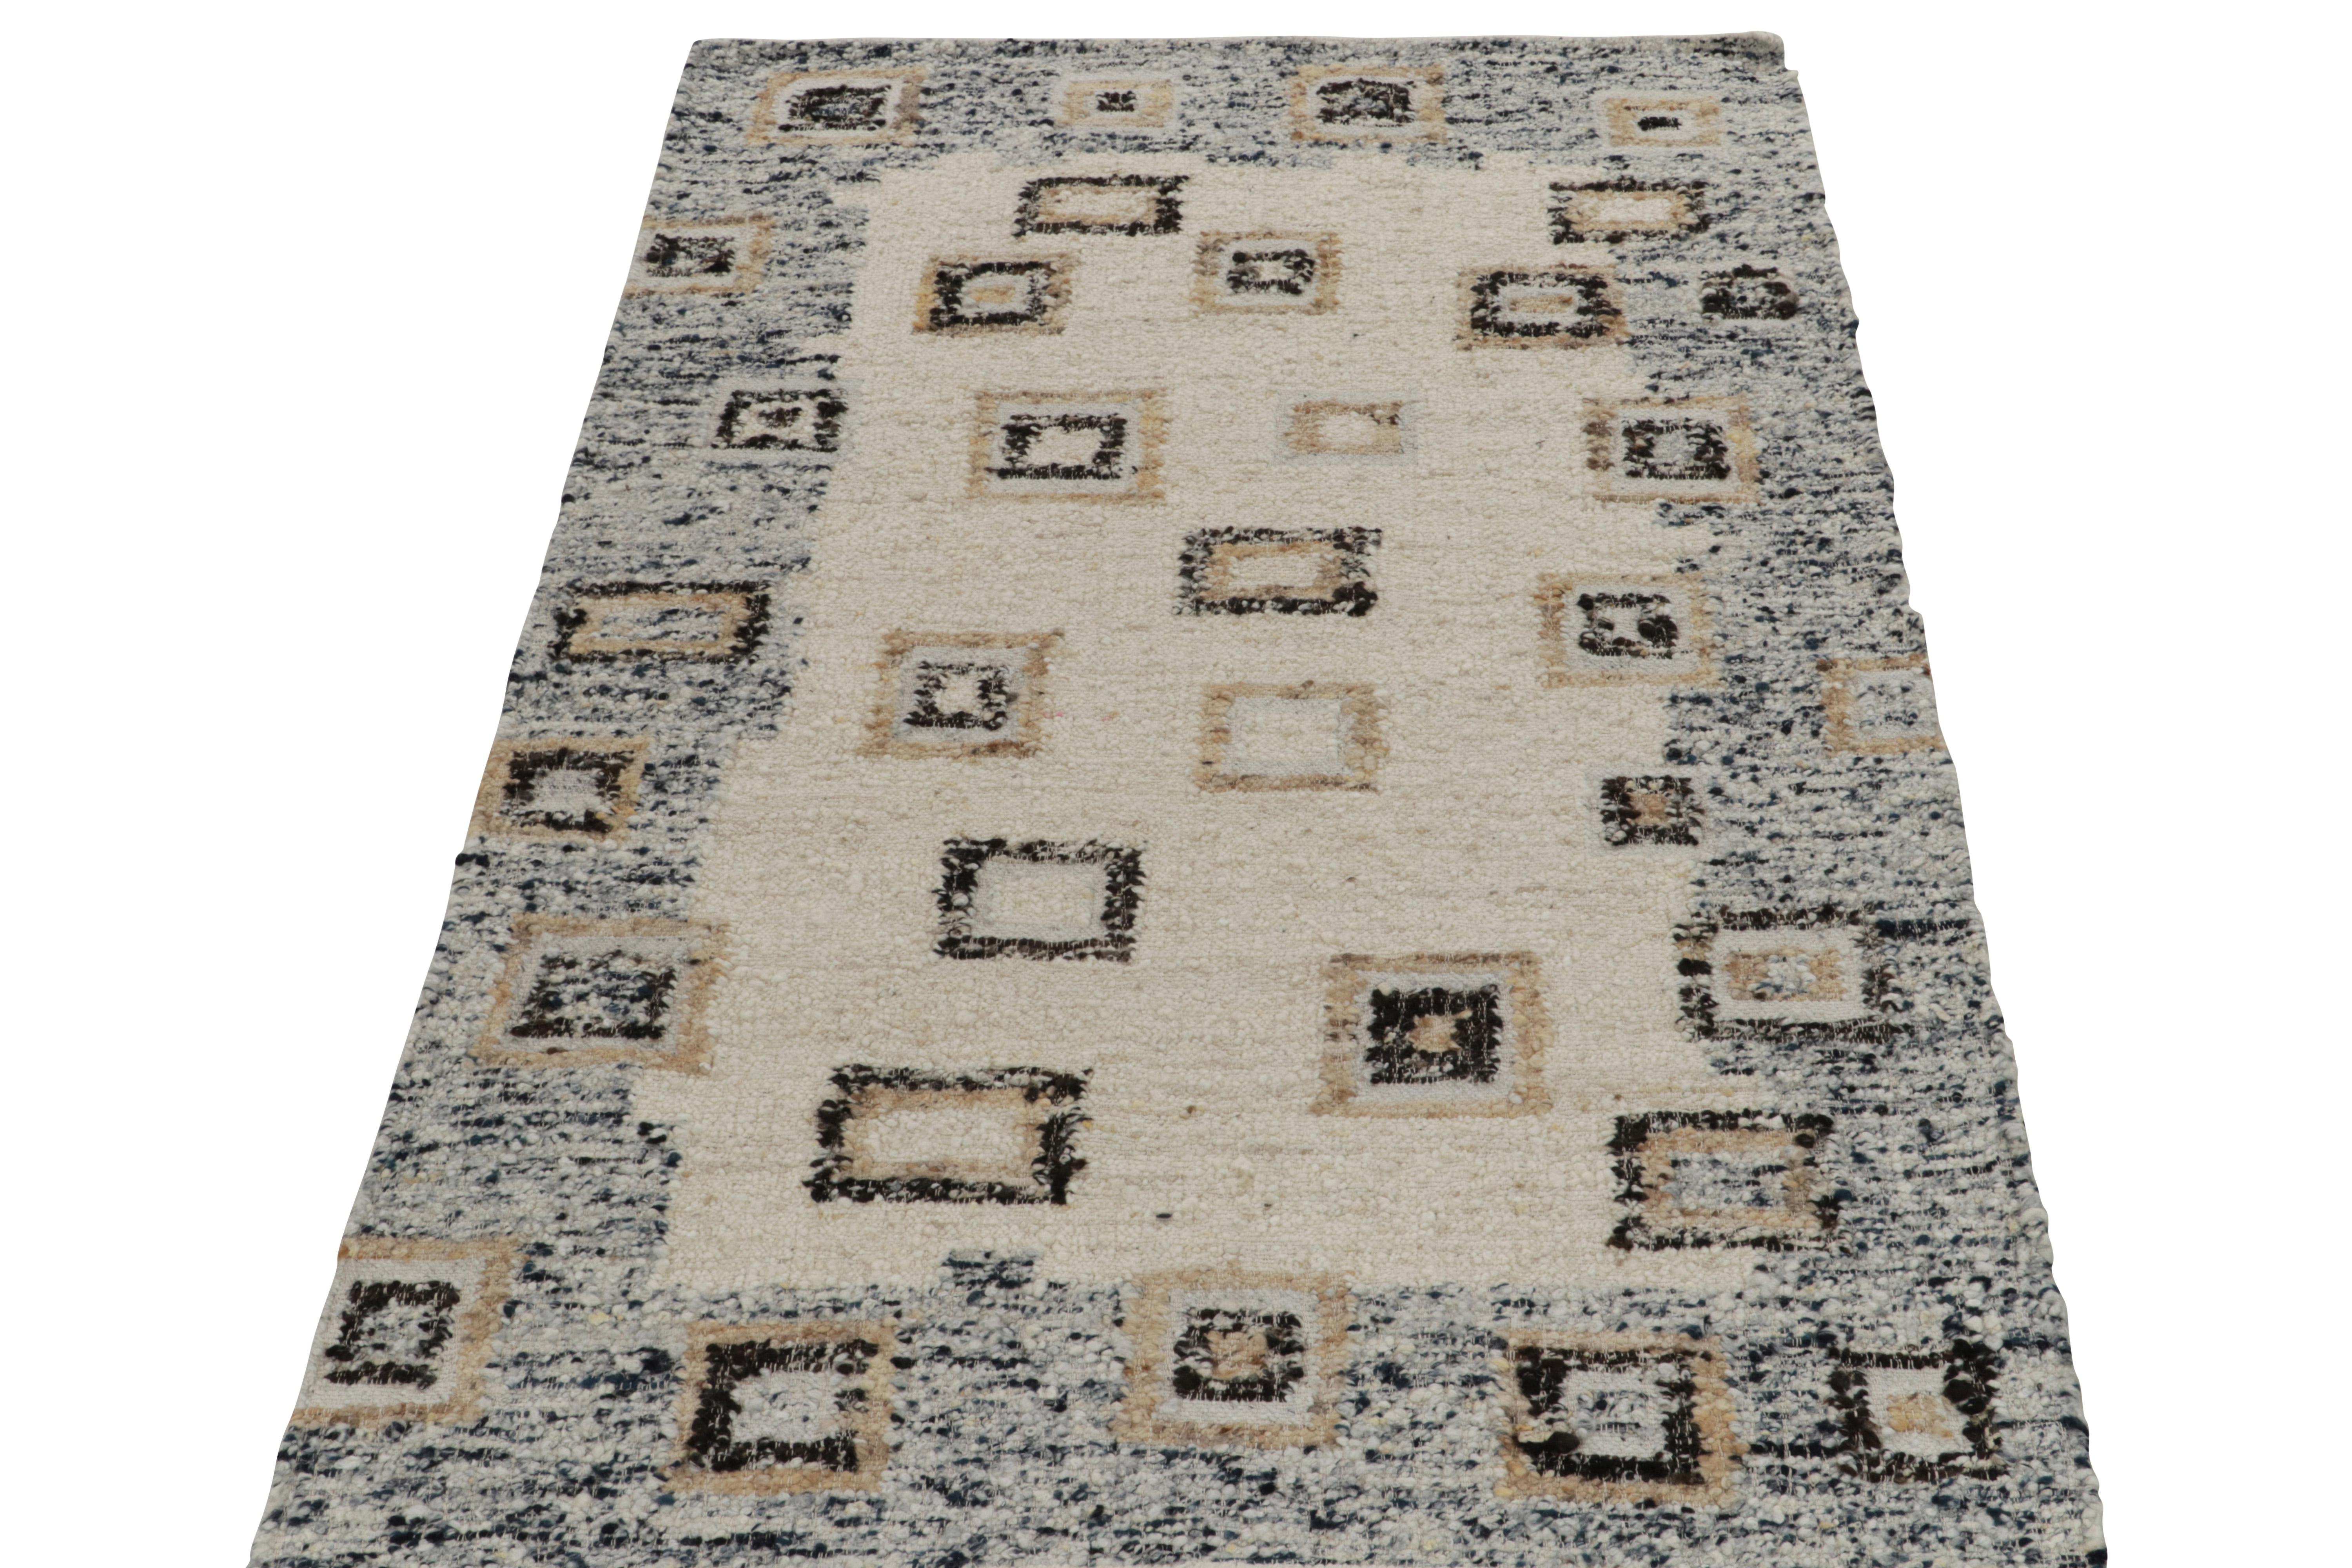 Rug & Kilim unveils an innovative 5x8 flat weave rug connoting a unique marriage of Deco style and bold texture. The rug features a modern geometric pattern in crisp white, beige-brown, and black & with a blue border—all manifested by handspinning a